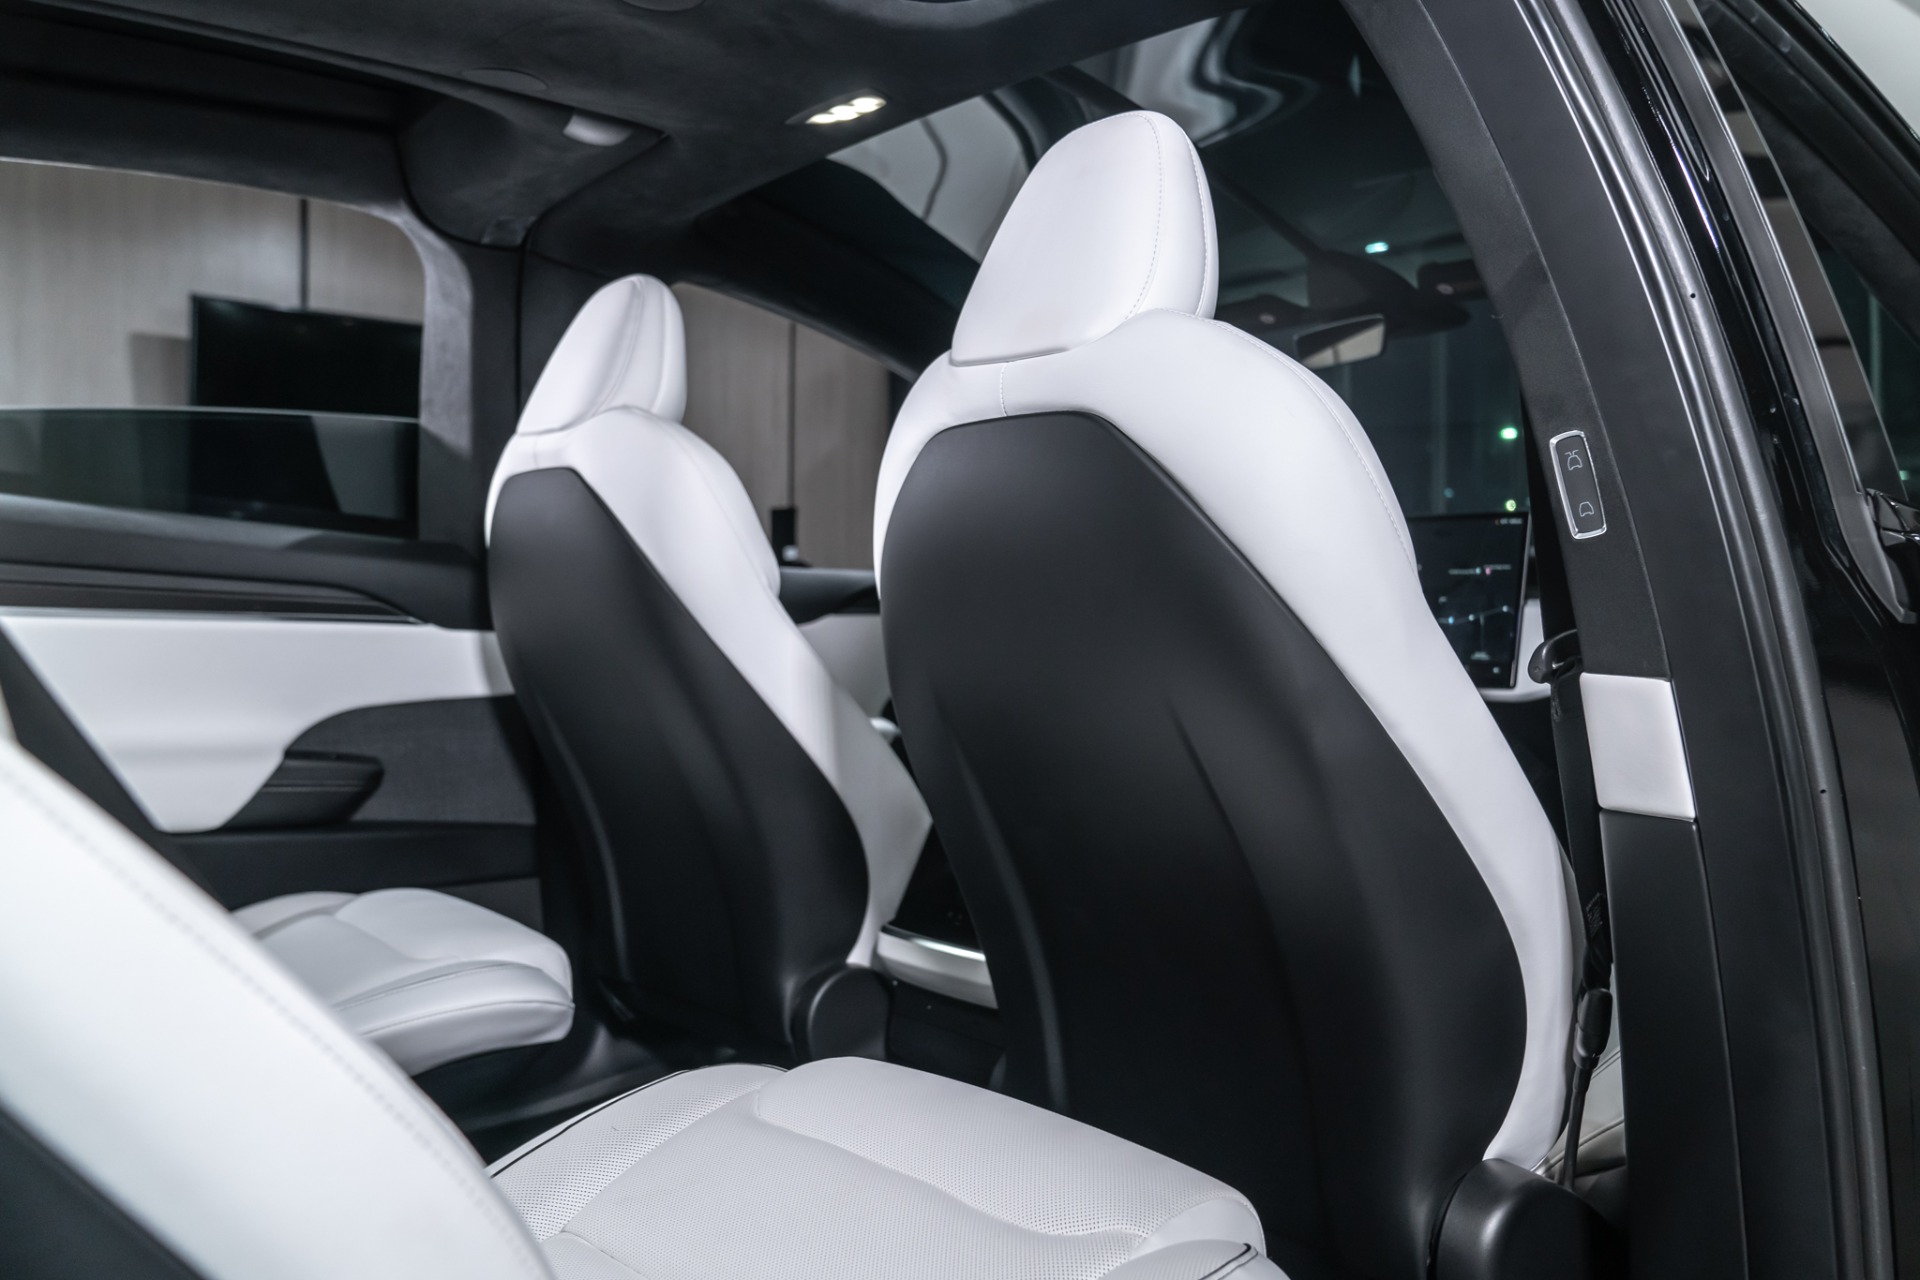 Used-2022-Tesla-Model-X-Plaid-SUV-FULL-Self-Driving-6-Seat-Layout-EVERY-OPTION-LOADED